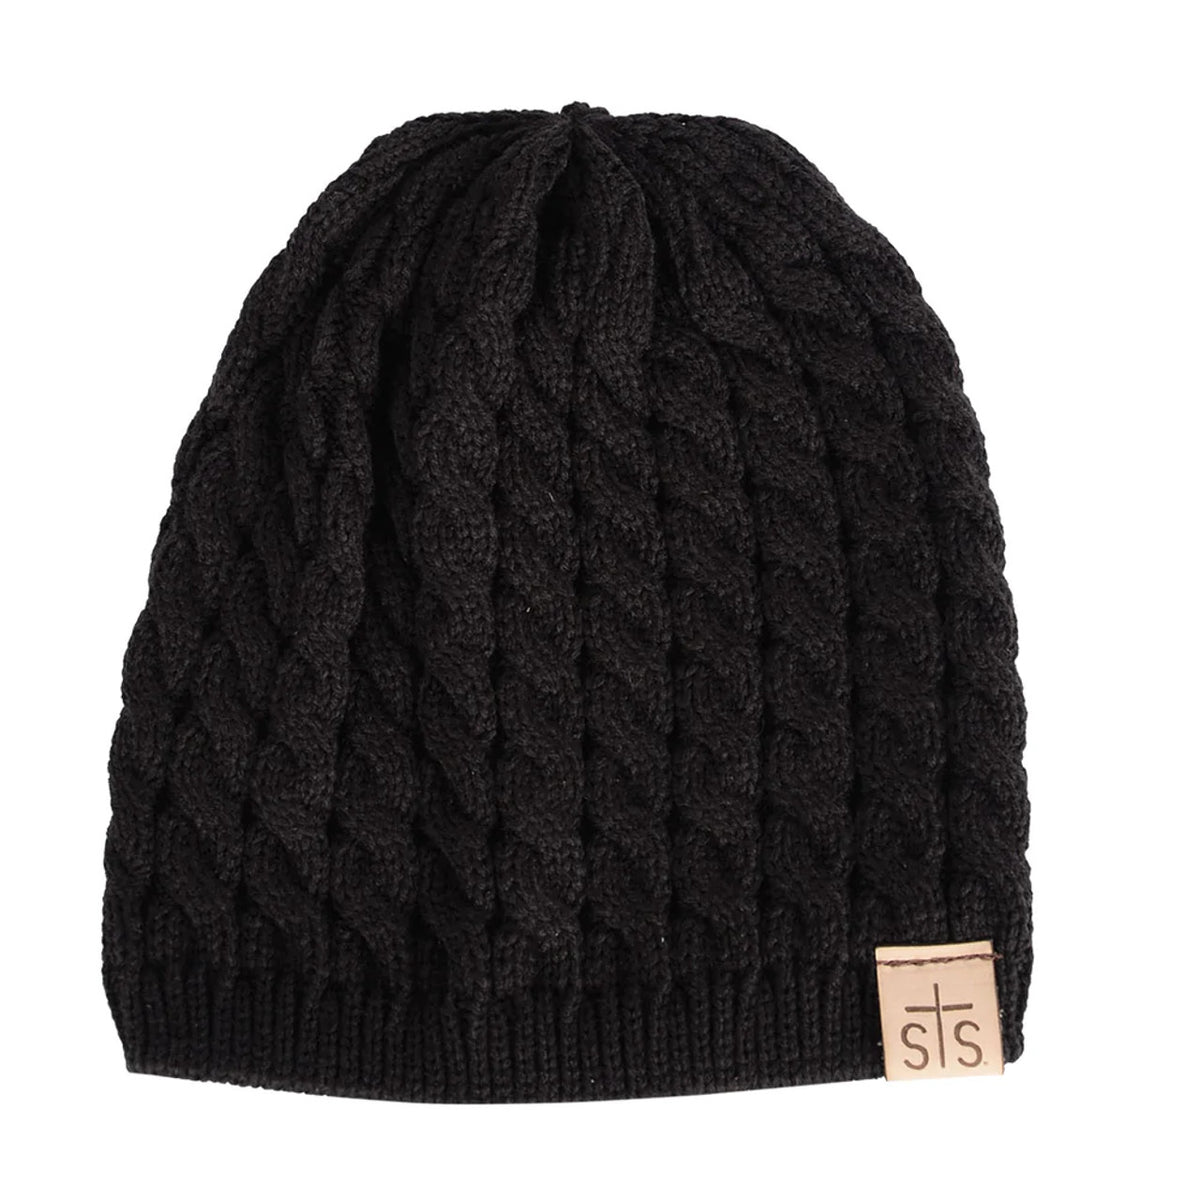 STS Ranchwear Cable Knit Beanie- Black